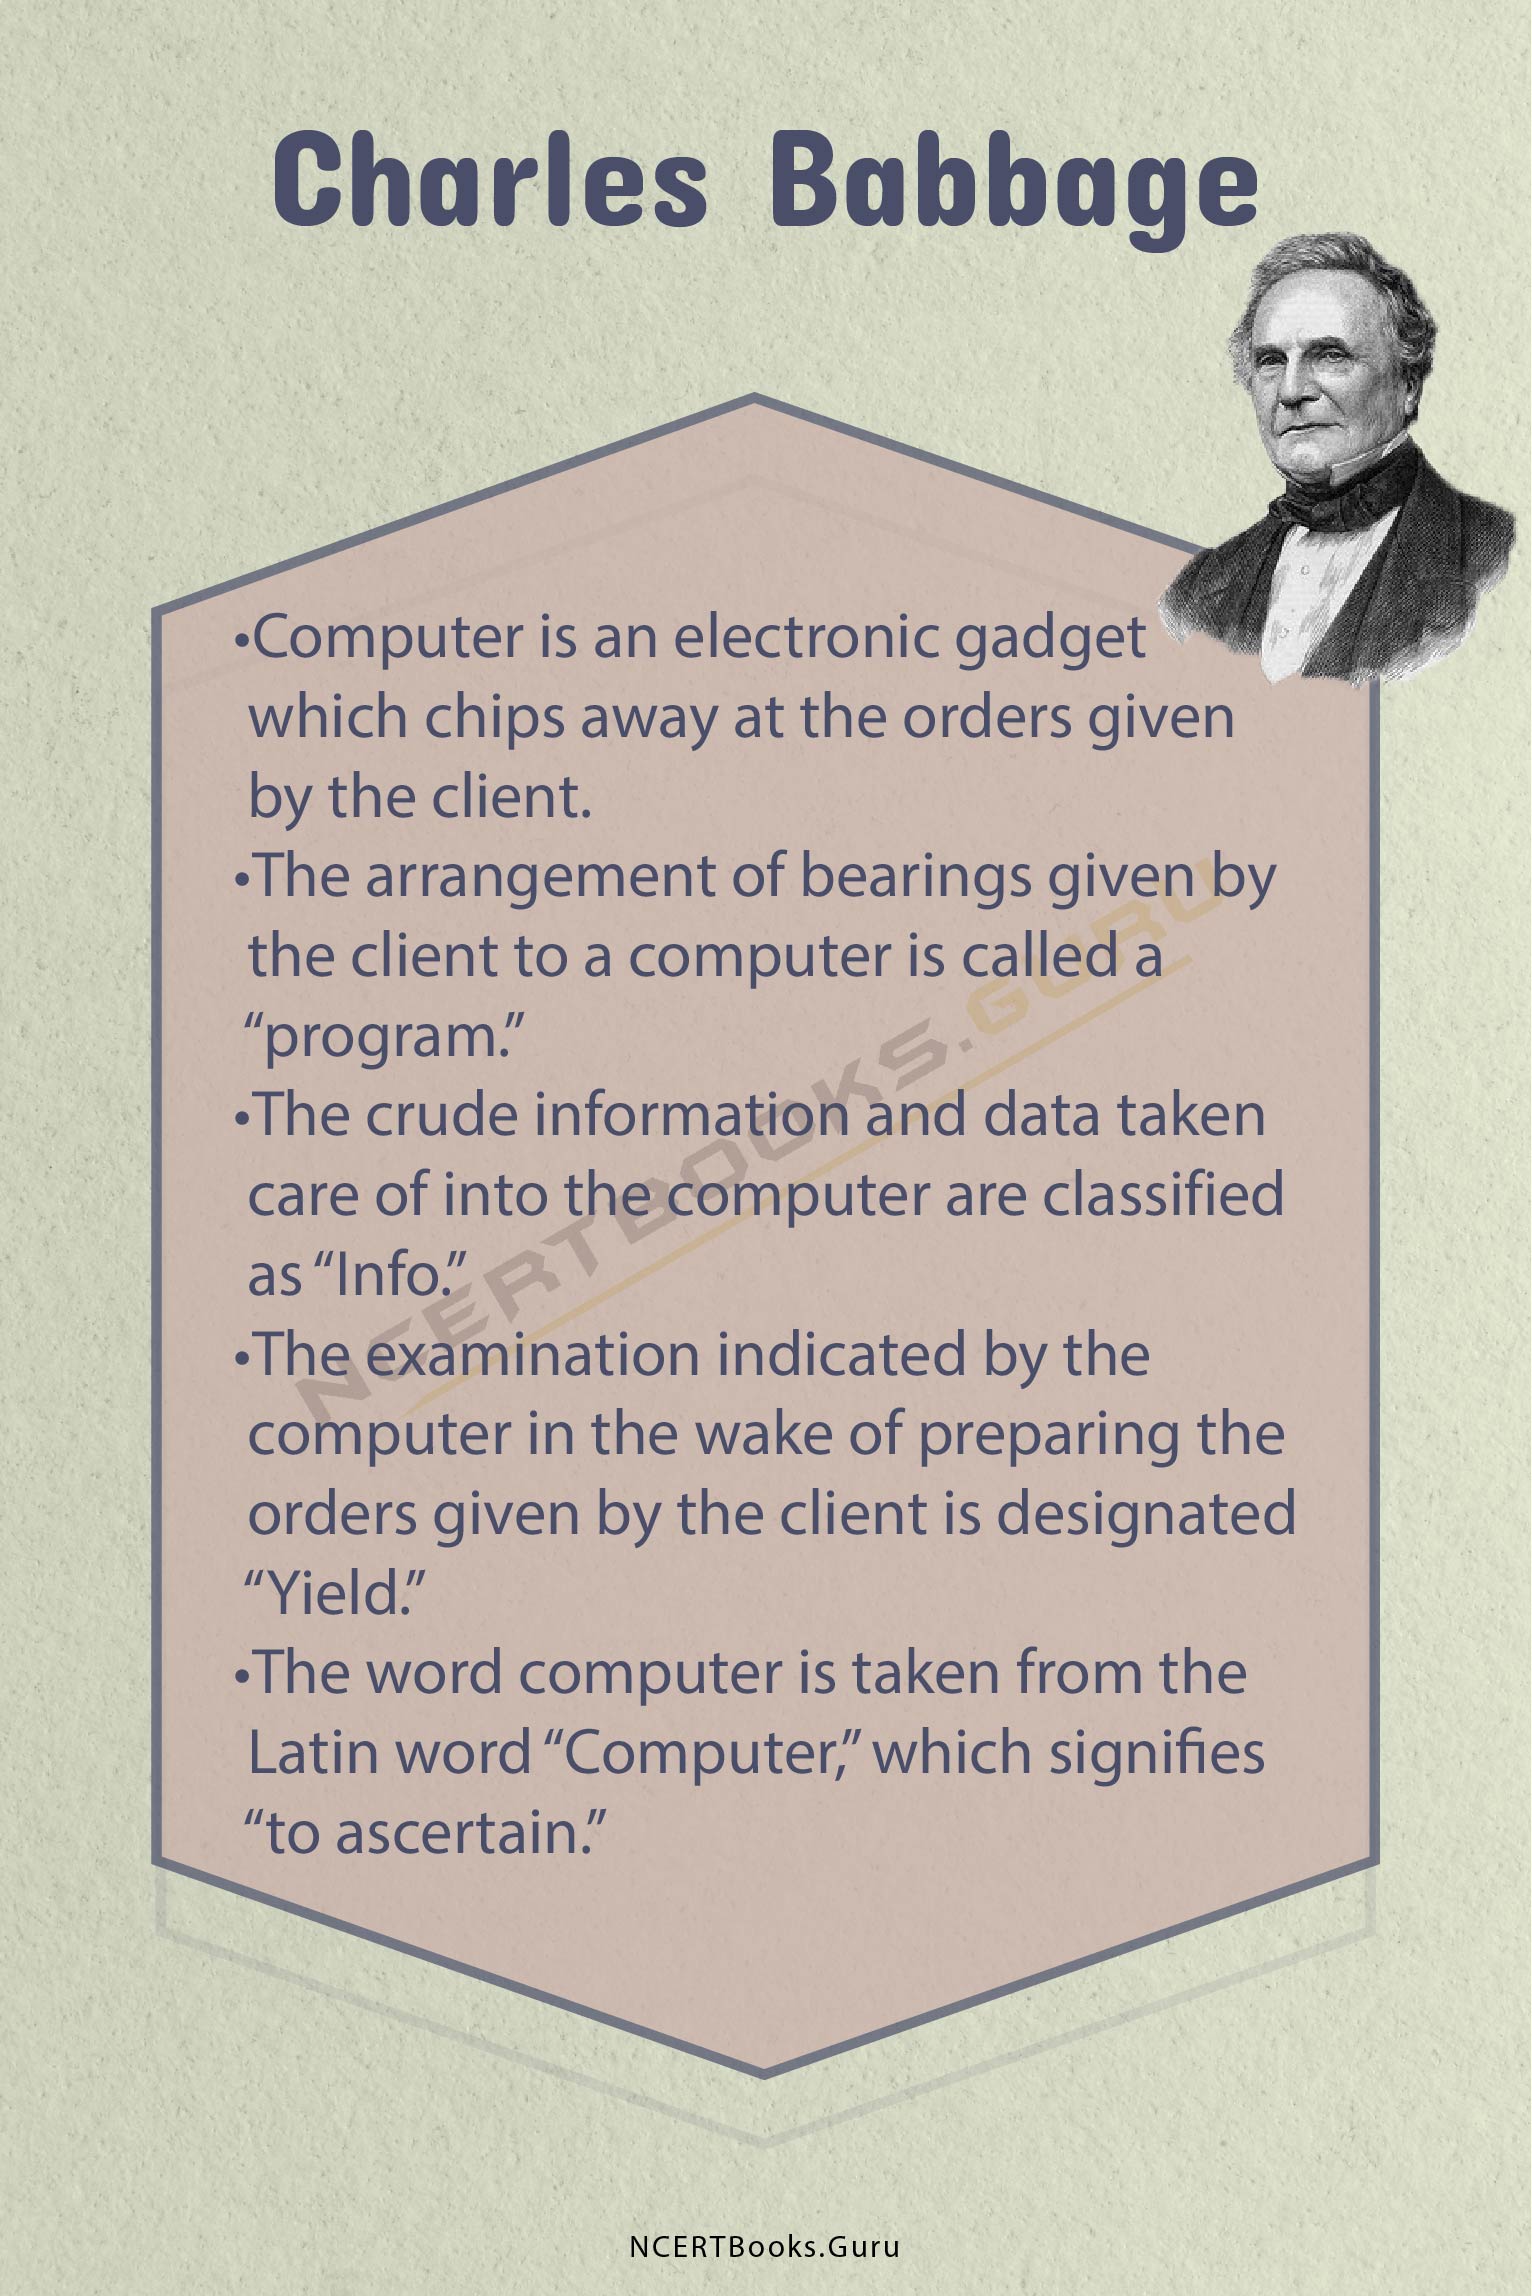 10 Lines on Charles Babbage 1